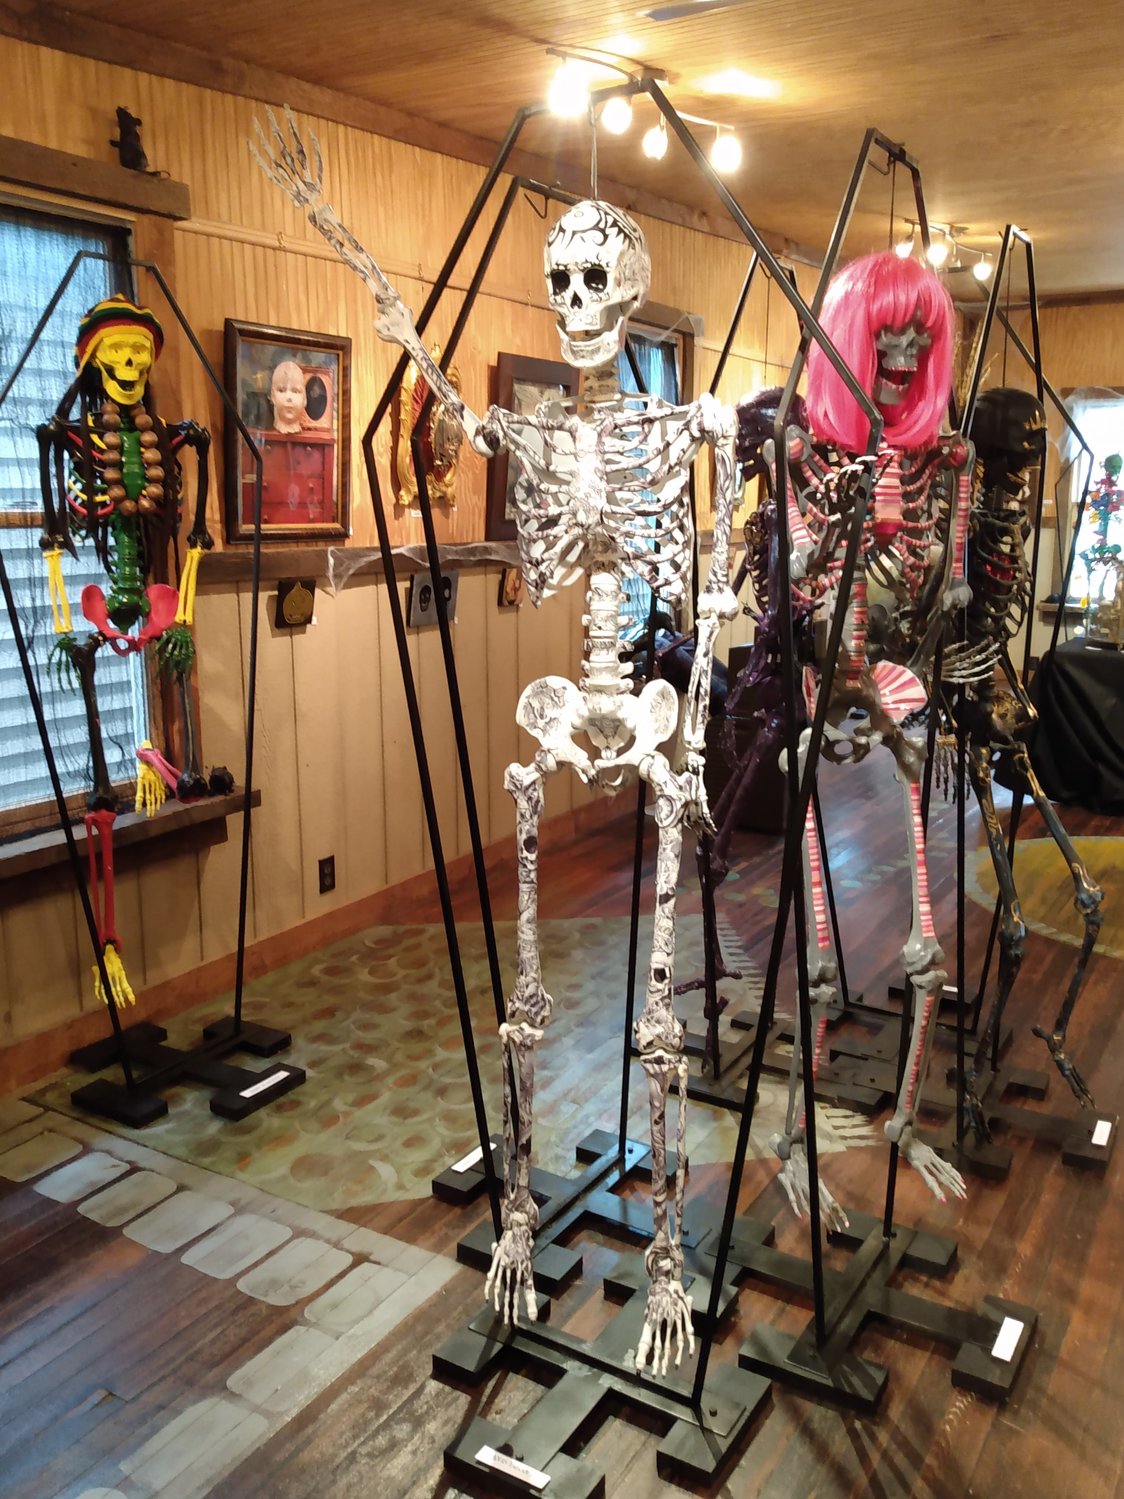 These skeletons being auctioned off are now hanging “Outa da Closet” as part of the Wayne County Arts Alliance’s “Haunted Mezzanine” exhibit.